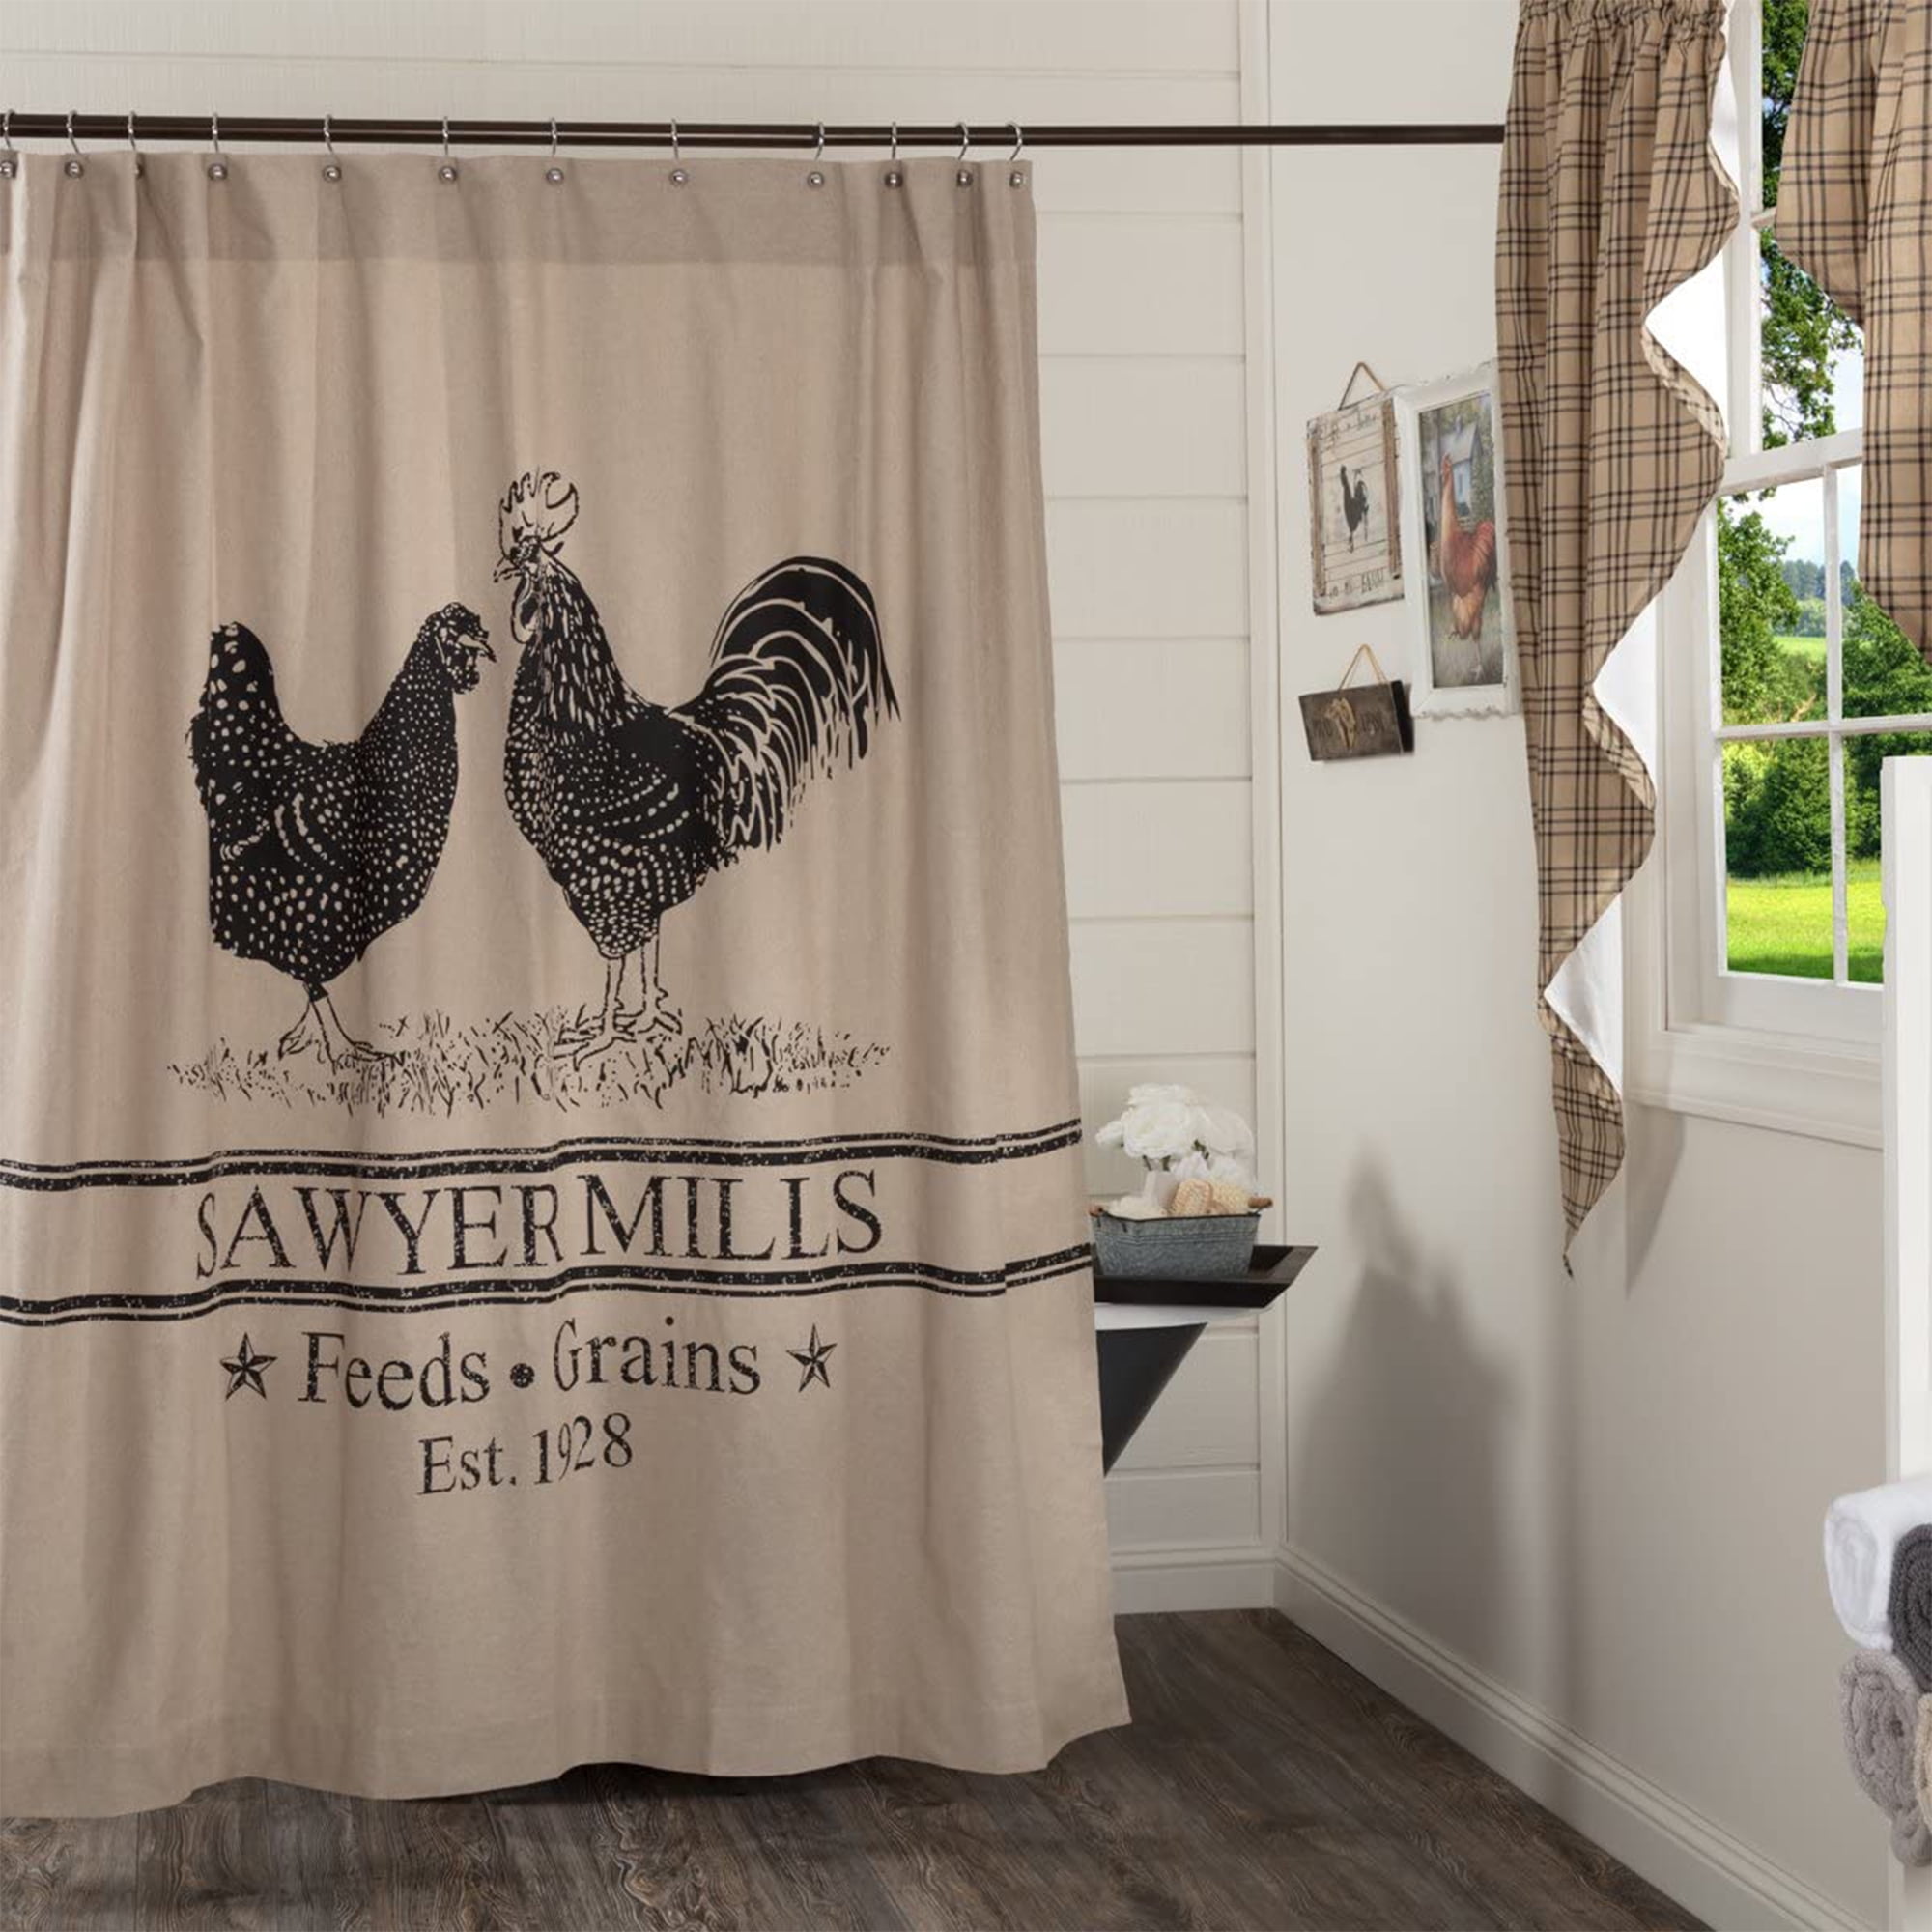 SAWYER MILL PIG Shower Curtain Farmhouse PIG FEED VHC Primitive Country Rustic 